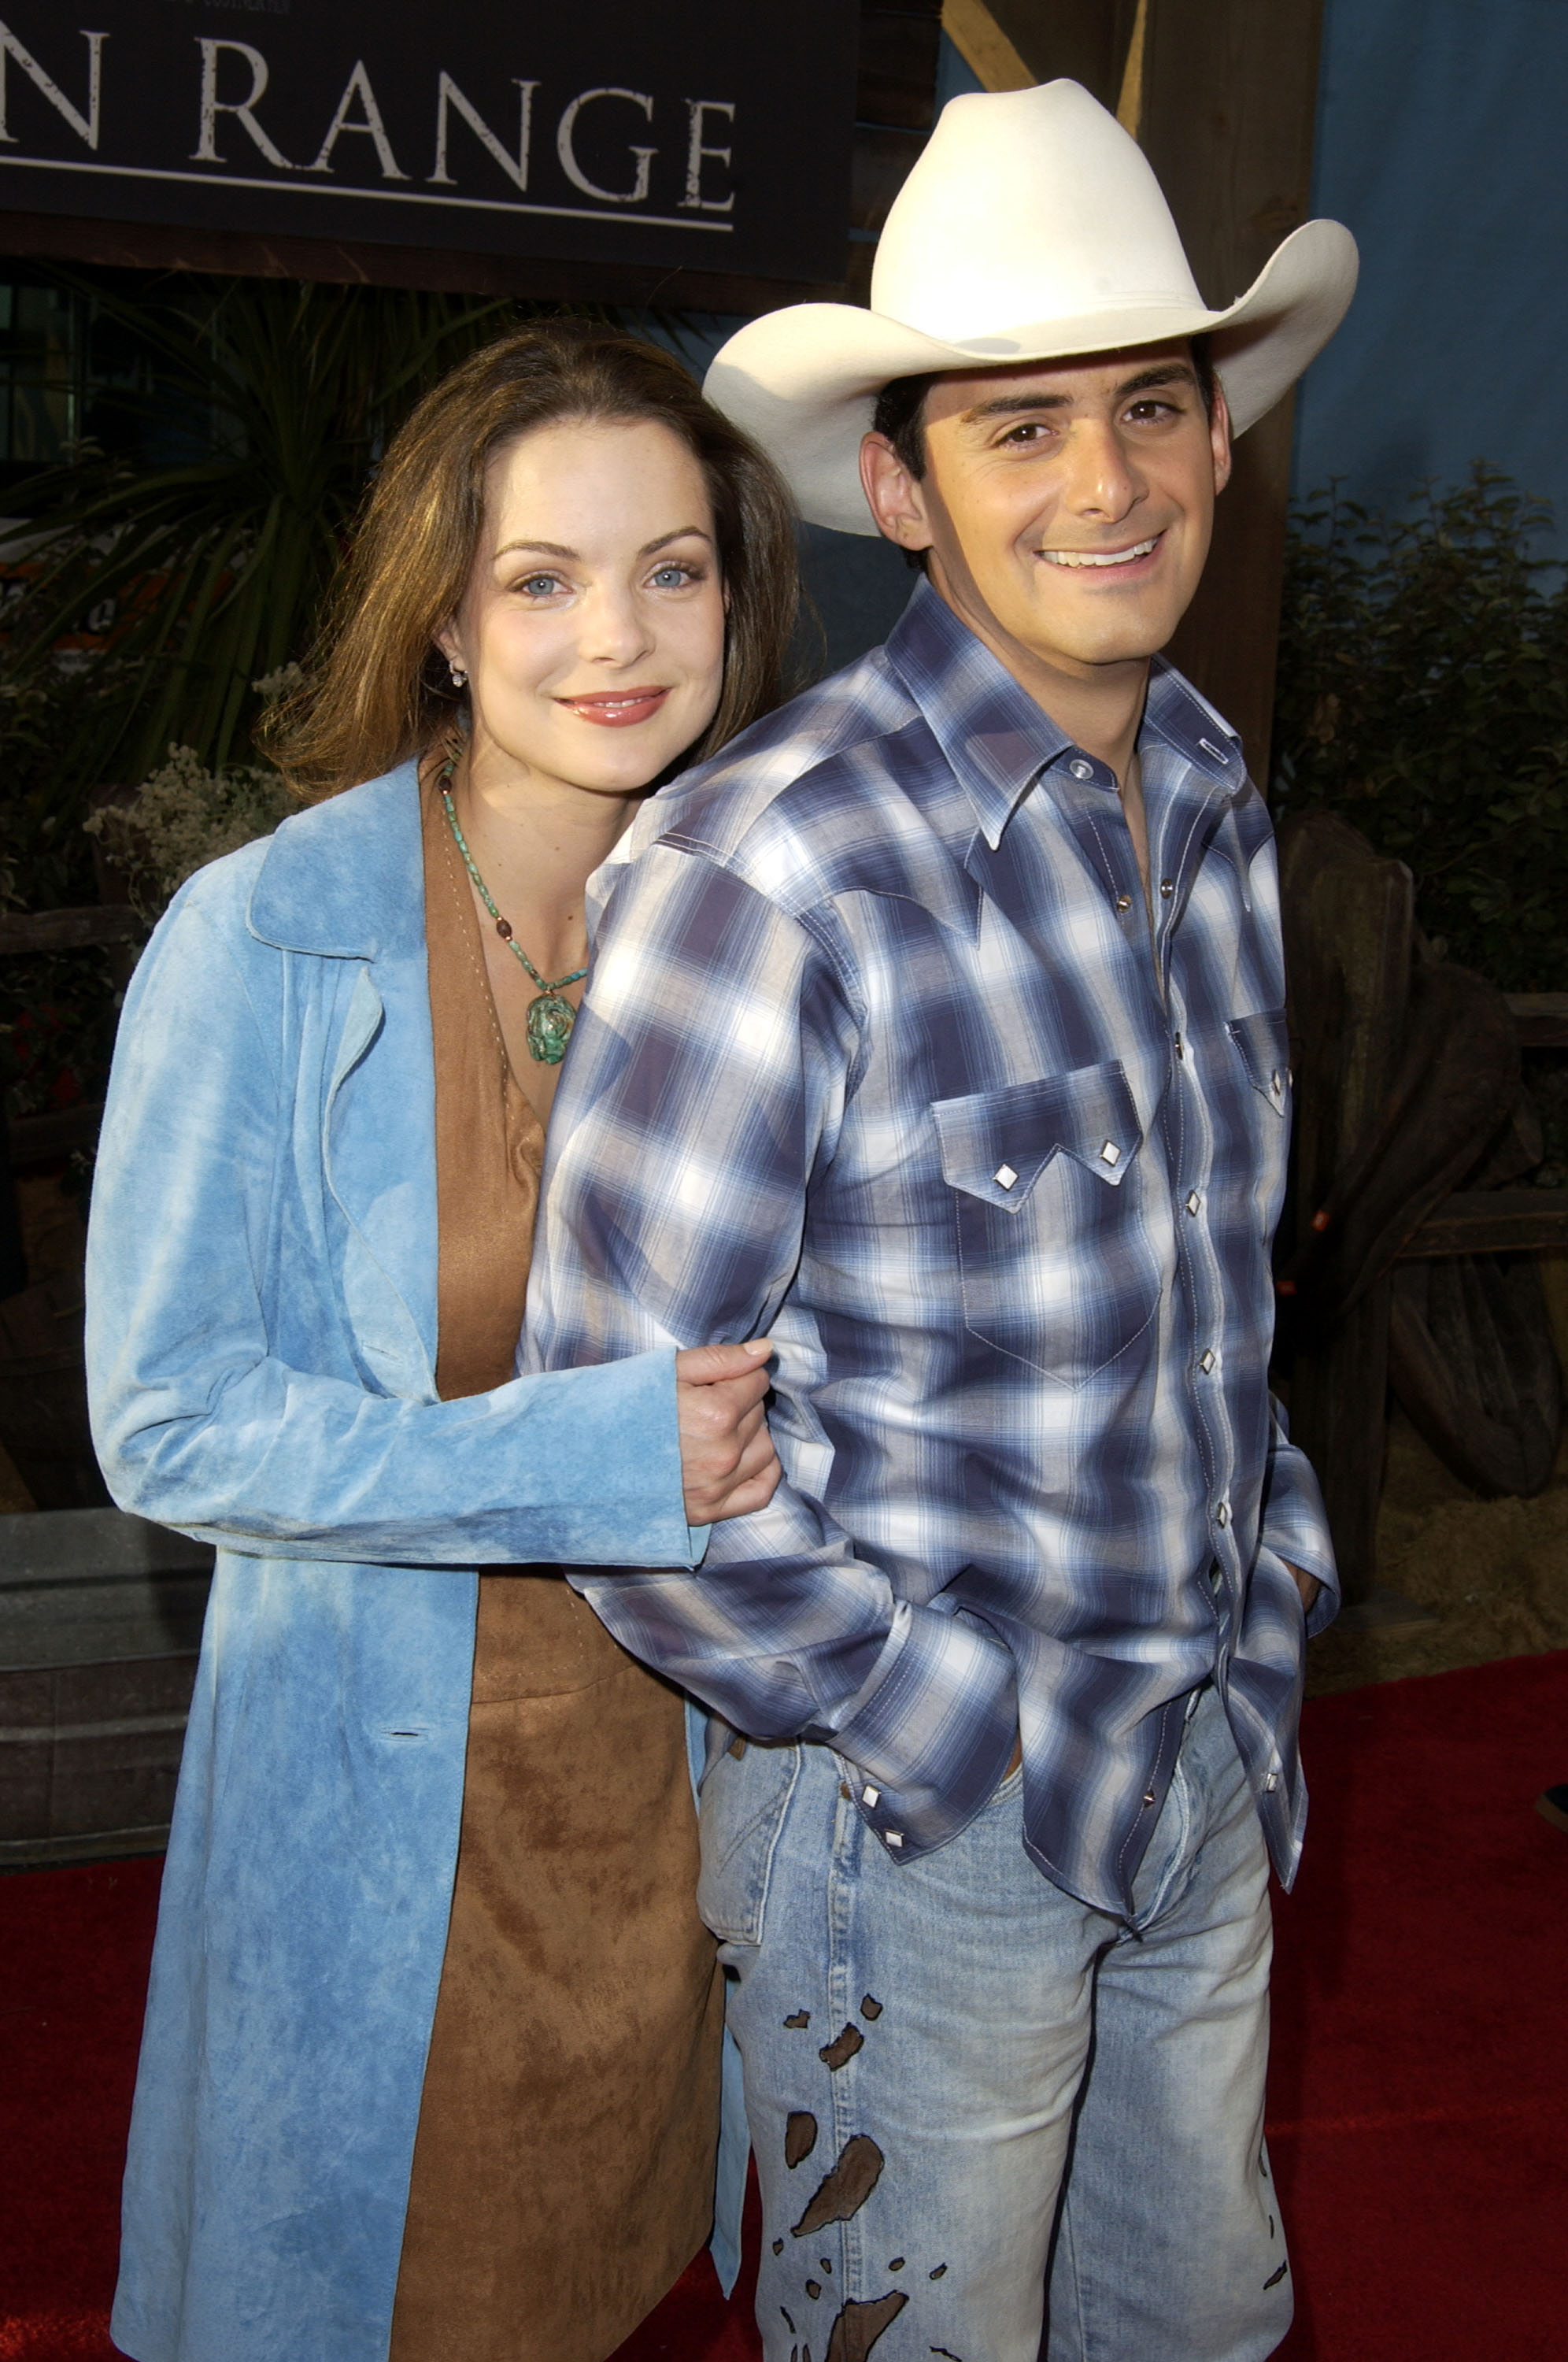 Kimberly Williams and Brad Paisley during "Open Range" Premiere at El Capitan in Hollywood, California, United States. | Source: Getty Images